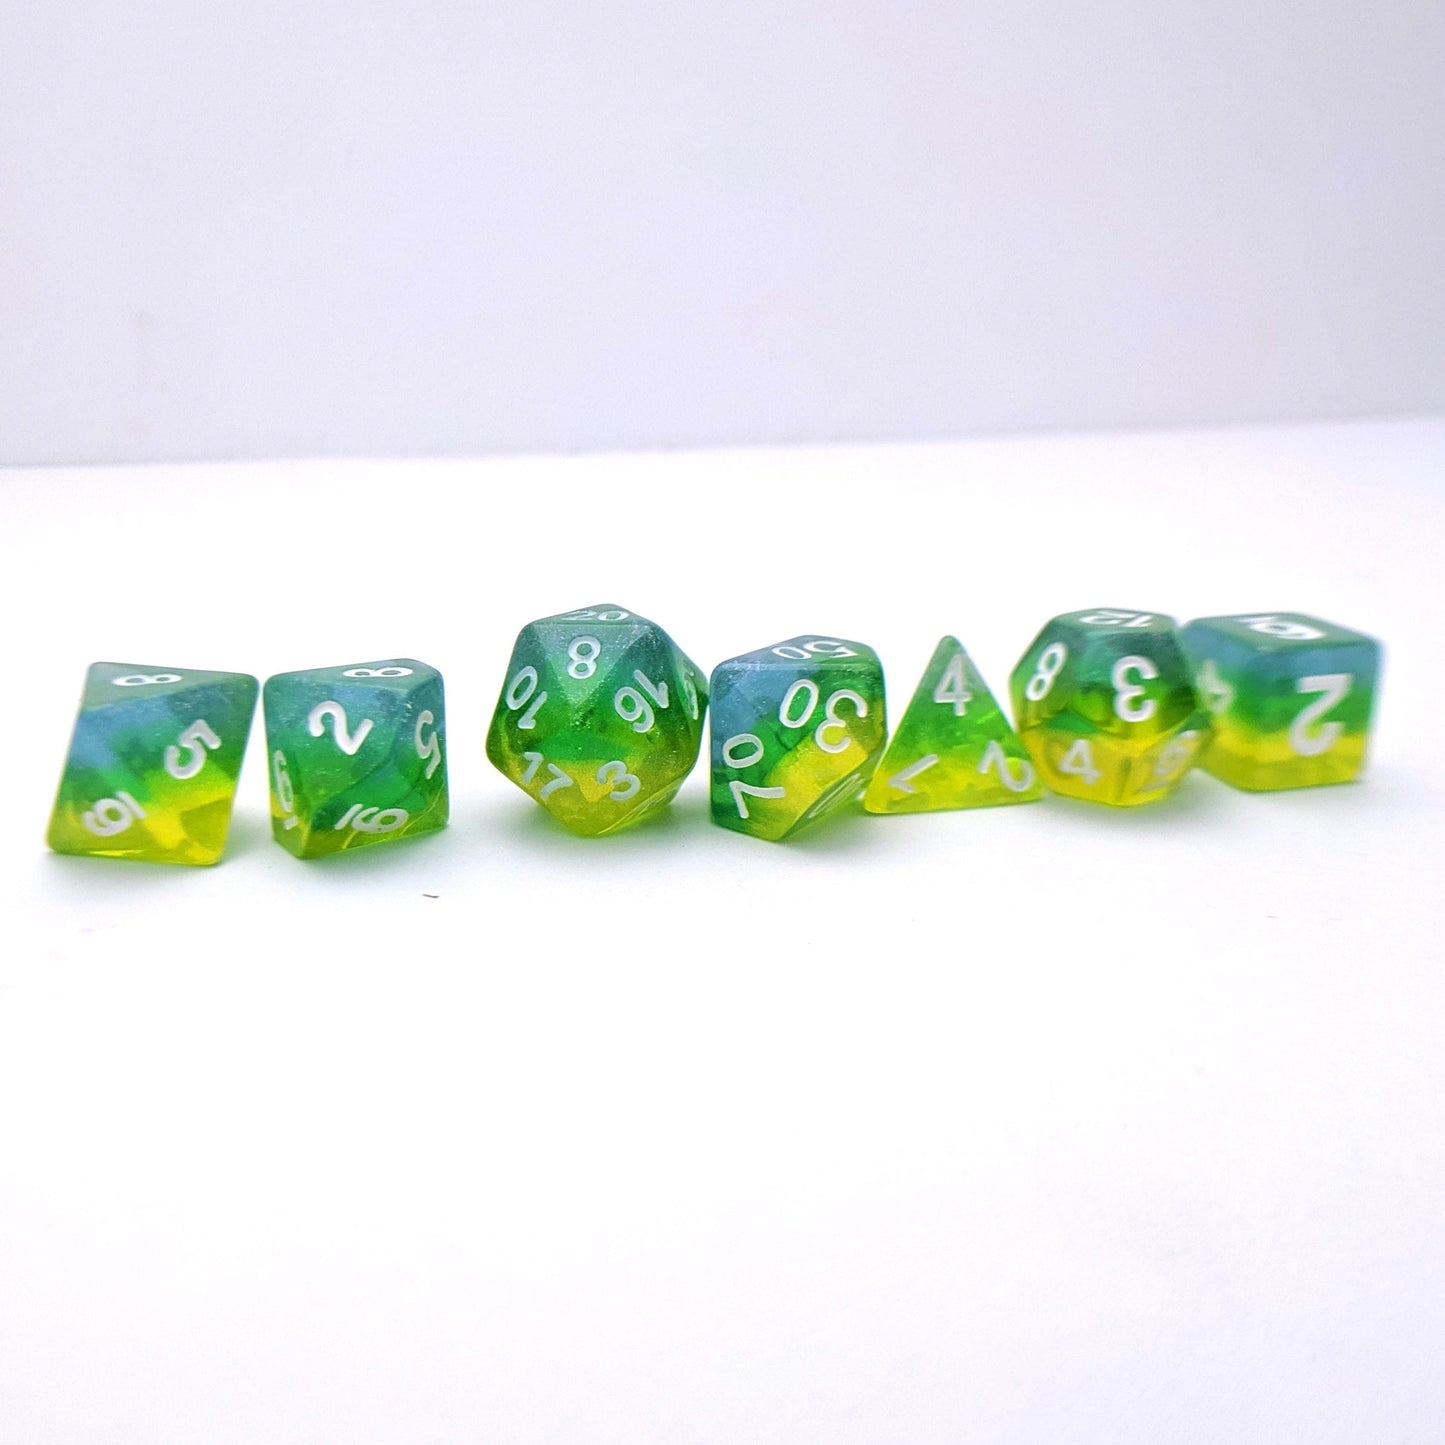 Genesis DnD Dice Set, Blue, green, and yellow Layer Glitter Dice - CozyGamer